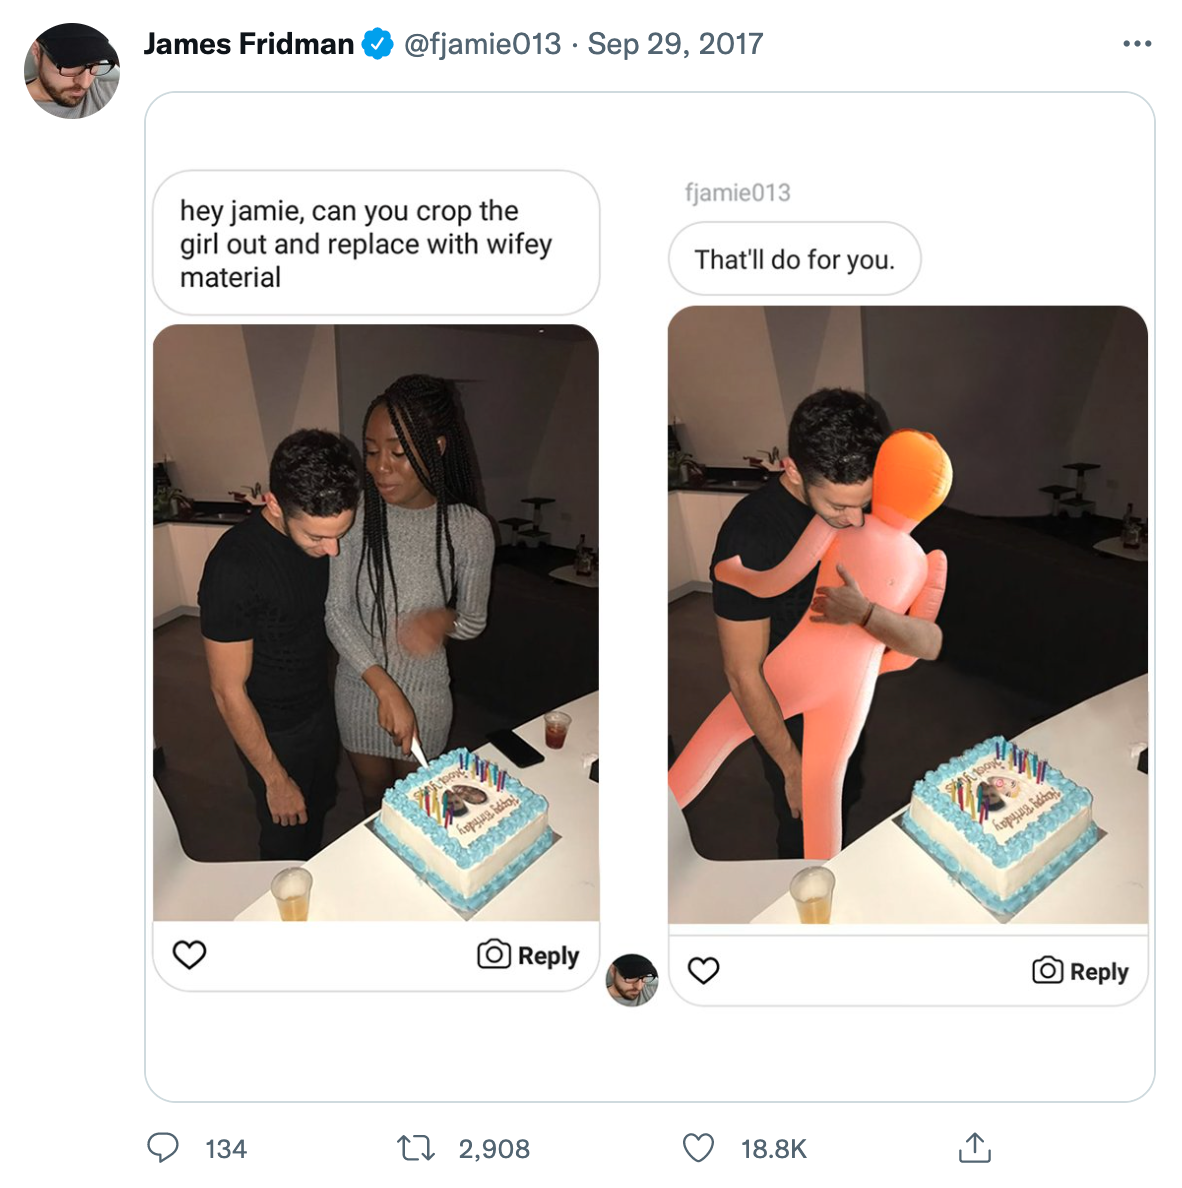 wholesome photoshop edits - shoulder - James Fridman hey jamie, can you crop the girl out and replace with wifey material 134 2000 12,908 fjamie013 That'll do for you.